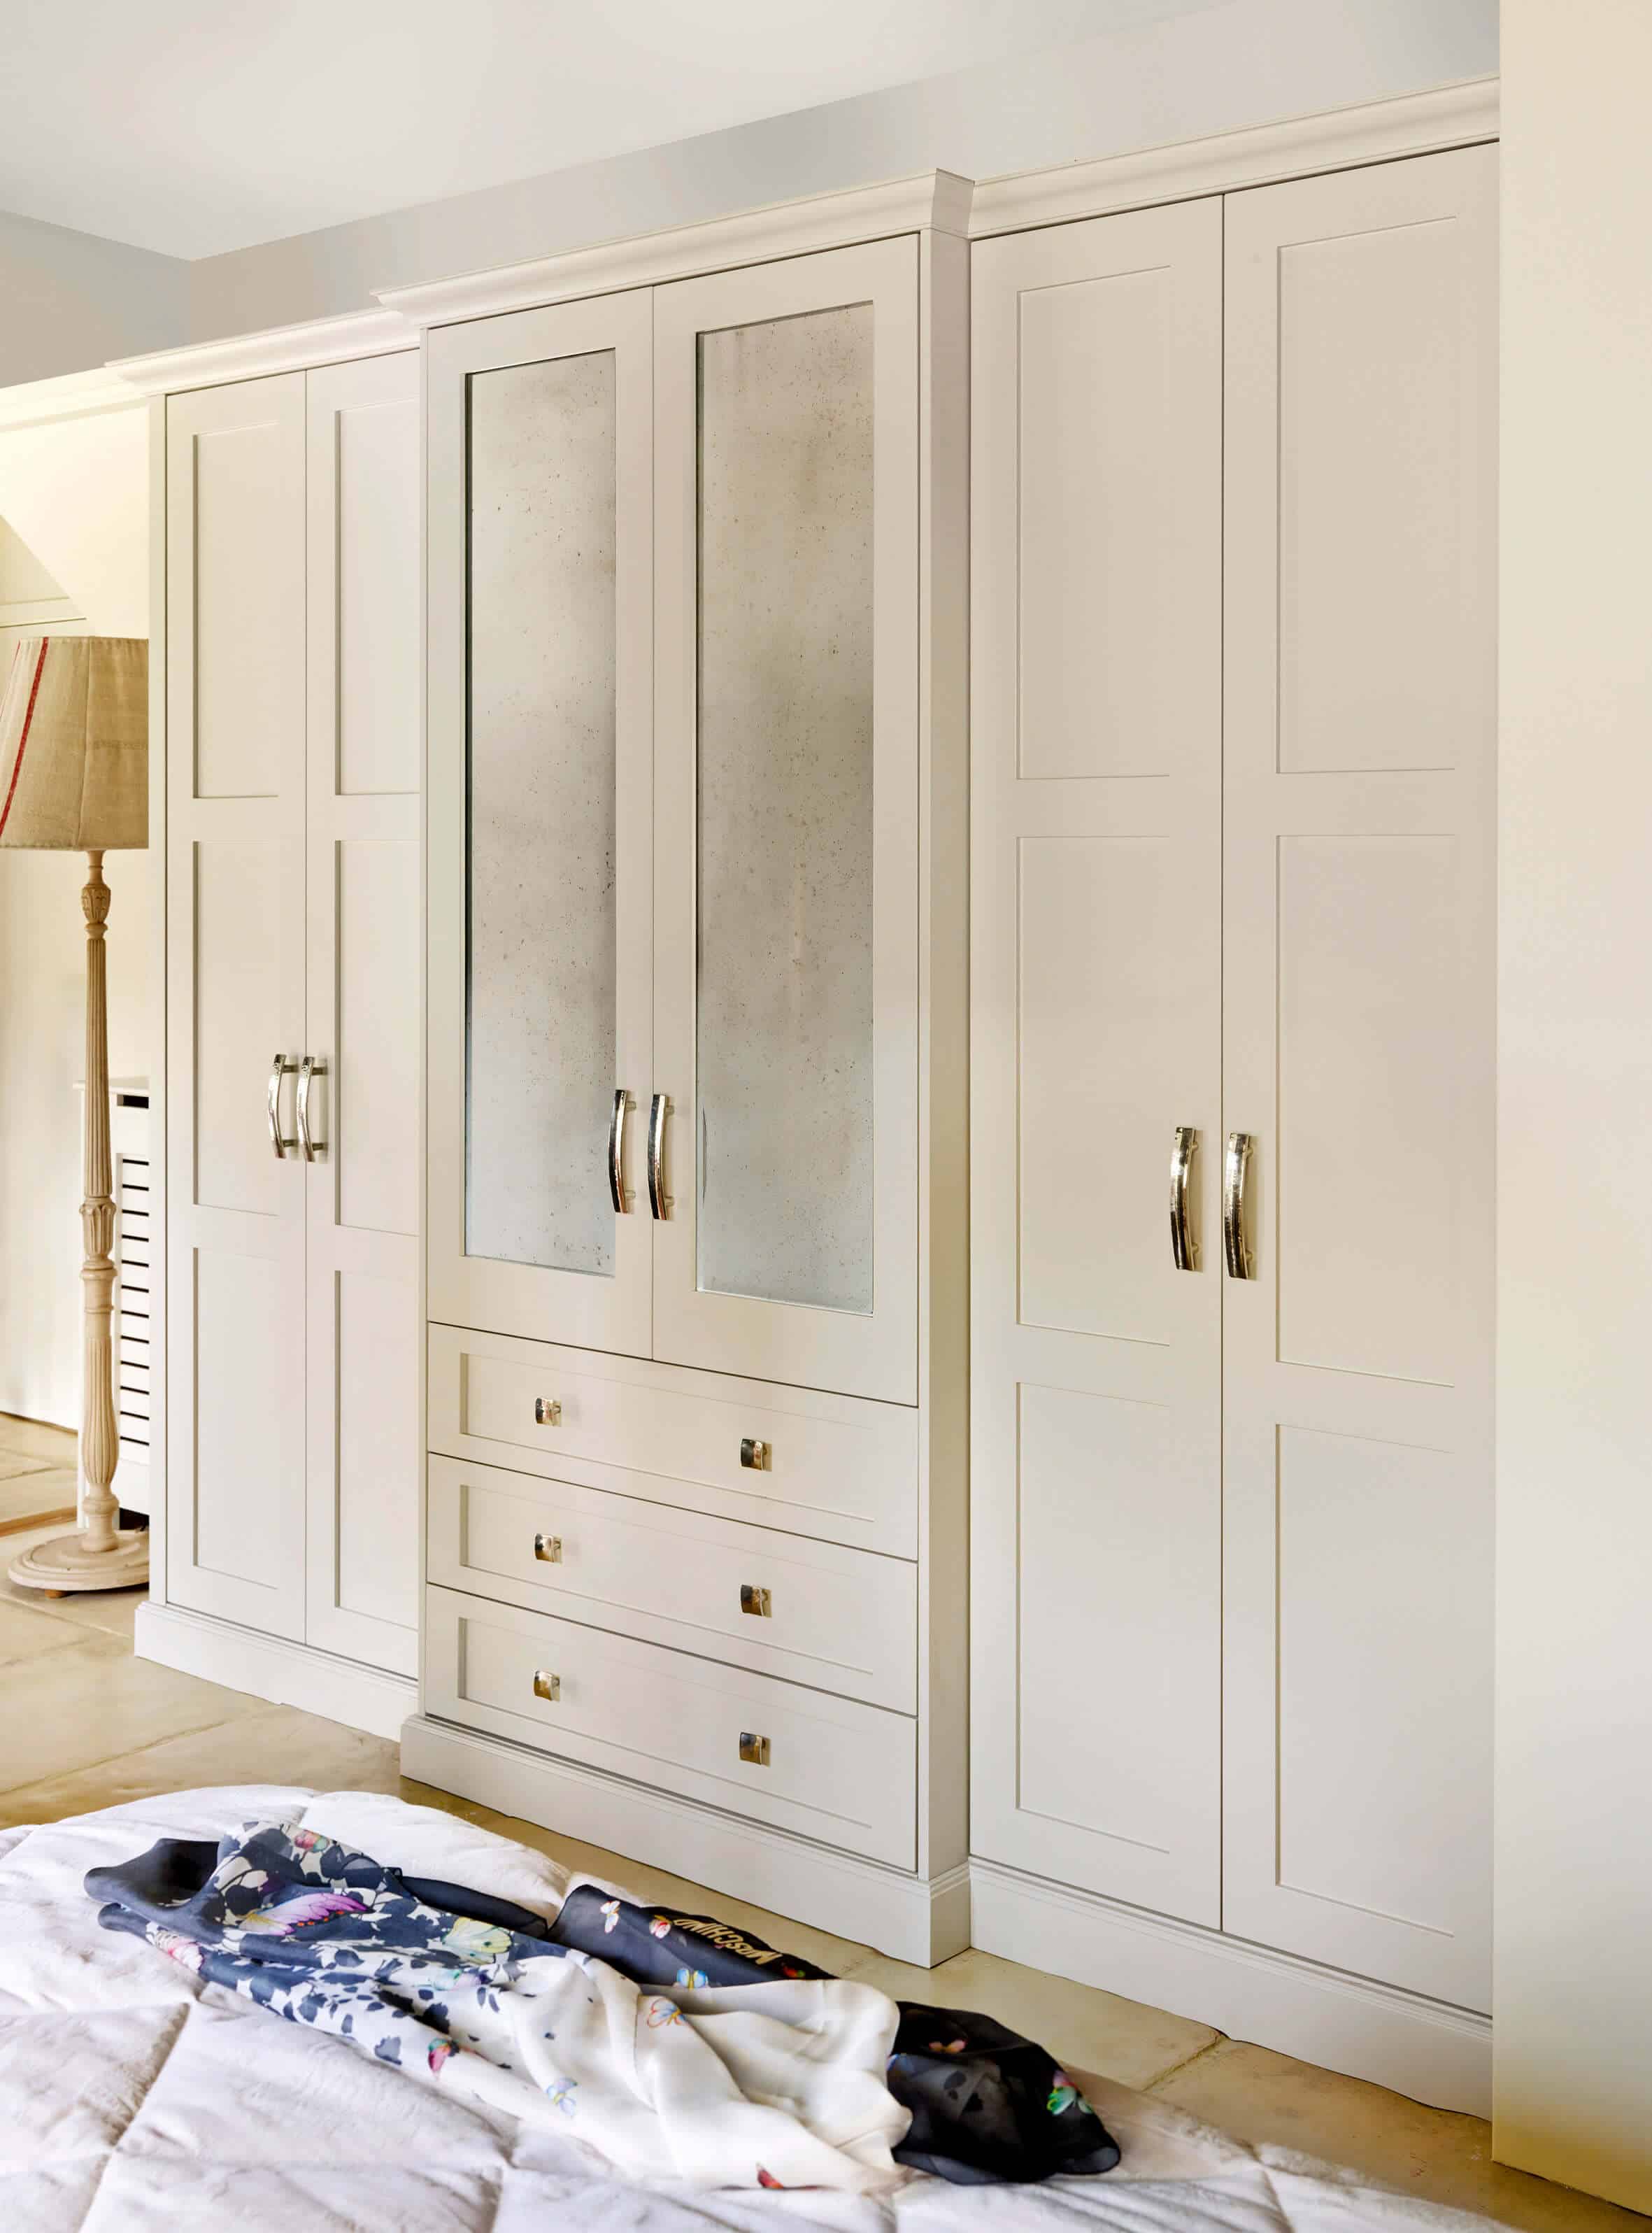 Shaker style wardrobe by John Lewis of Hungerford